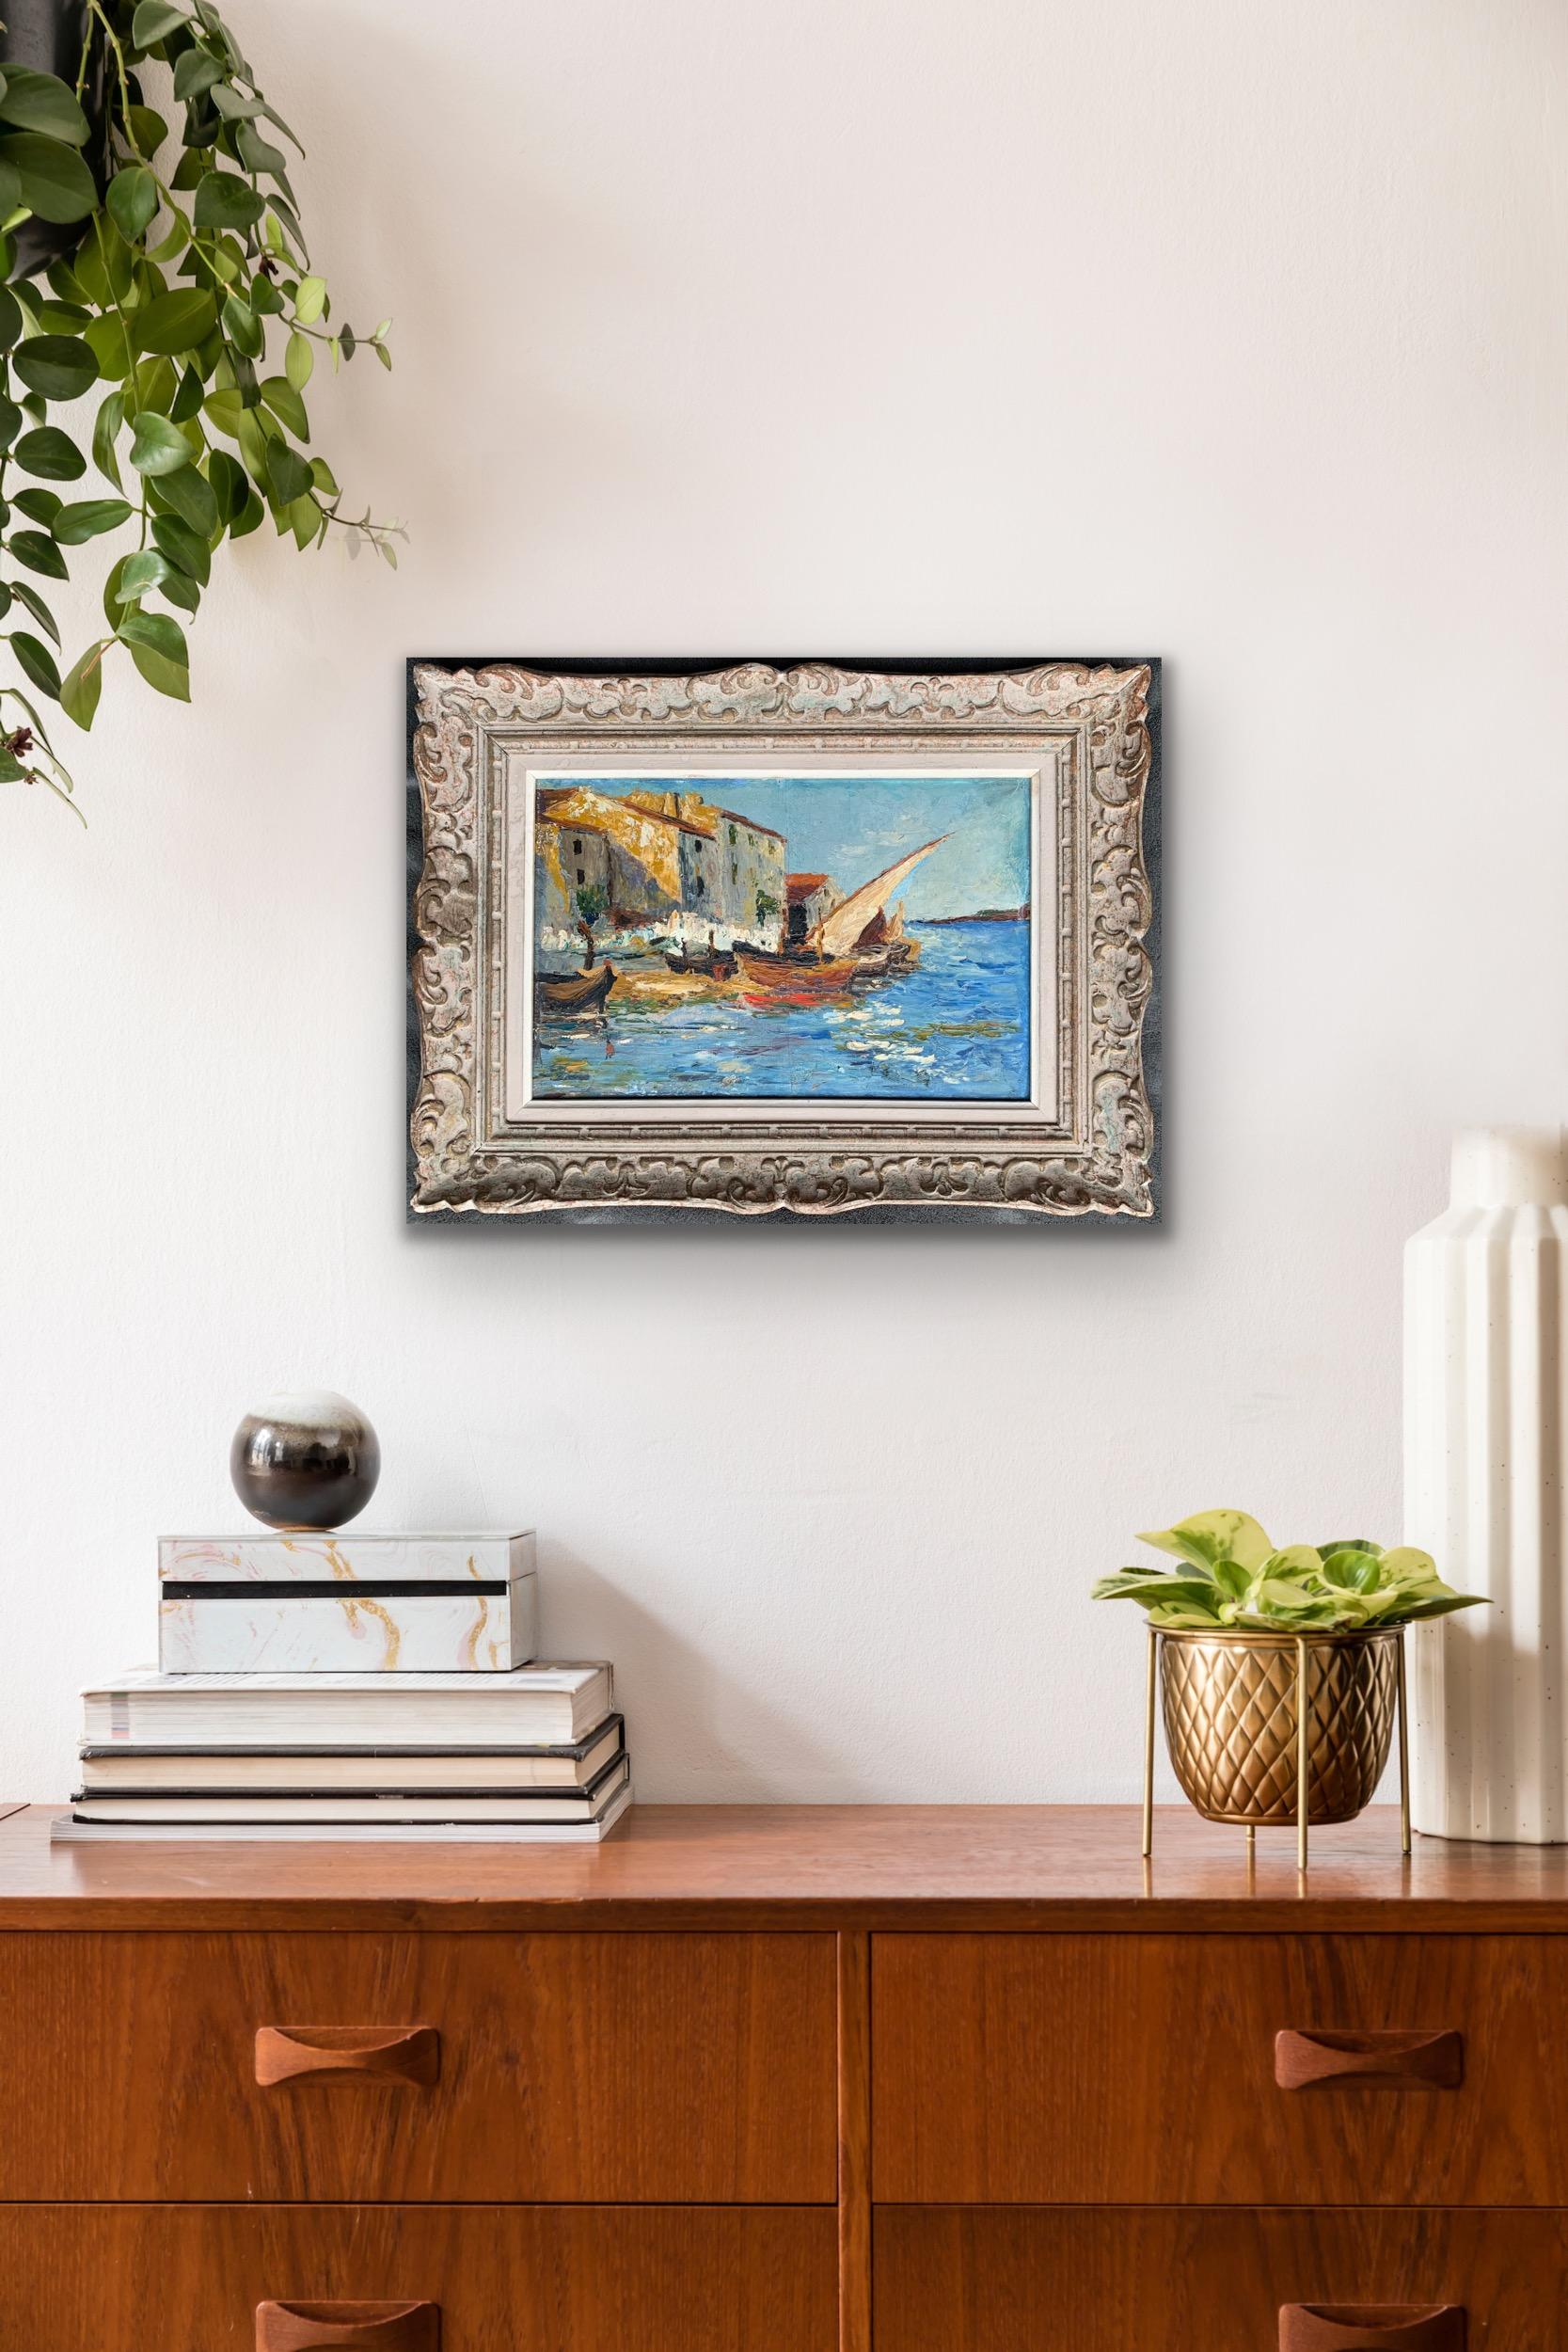 Beautifully vibrant French impressionist painting depicting a small harbour along the Mediterranean. Housed in a wonderfully matching frame. One can delightfully notice the sunshine reflecting on the buildings and small waves of the azure blue